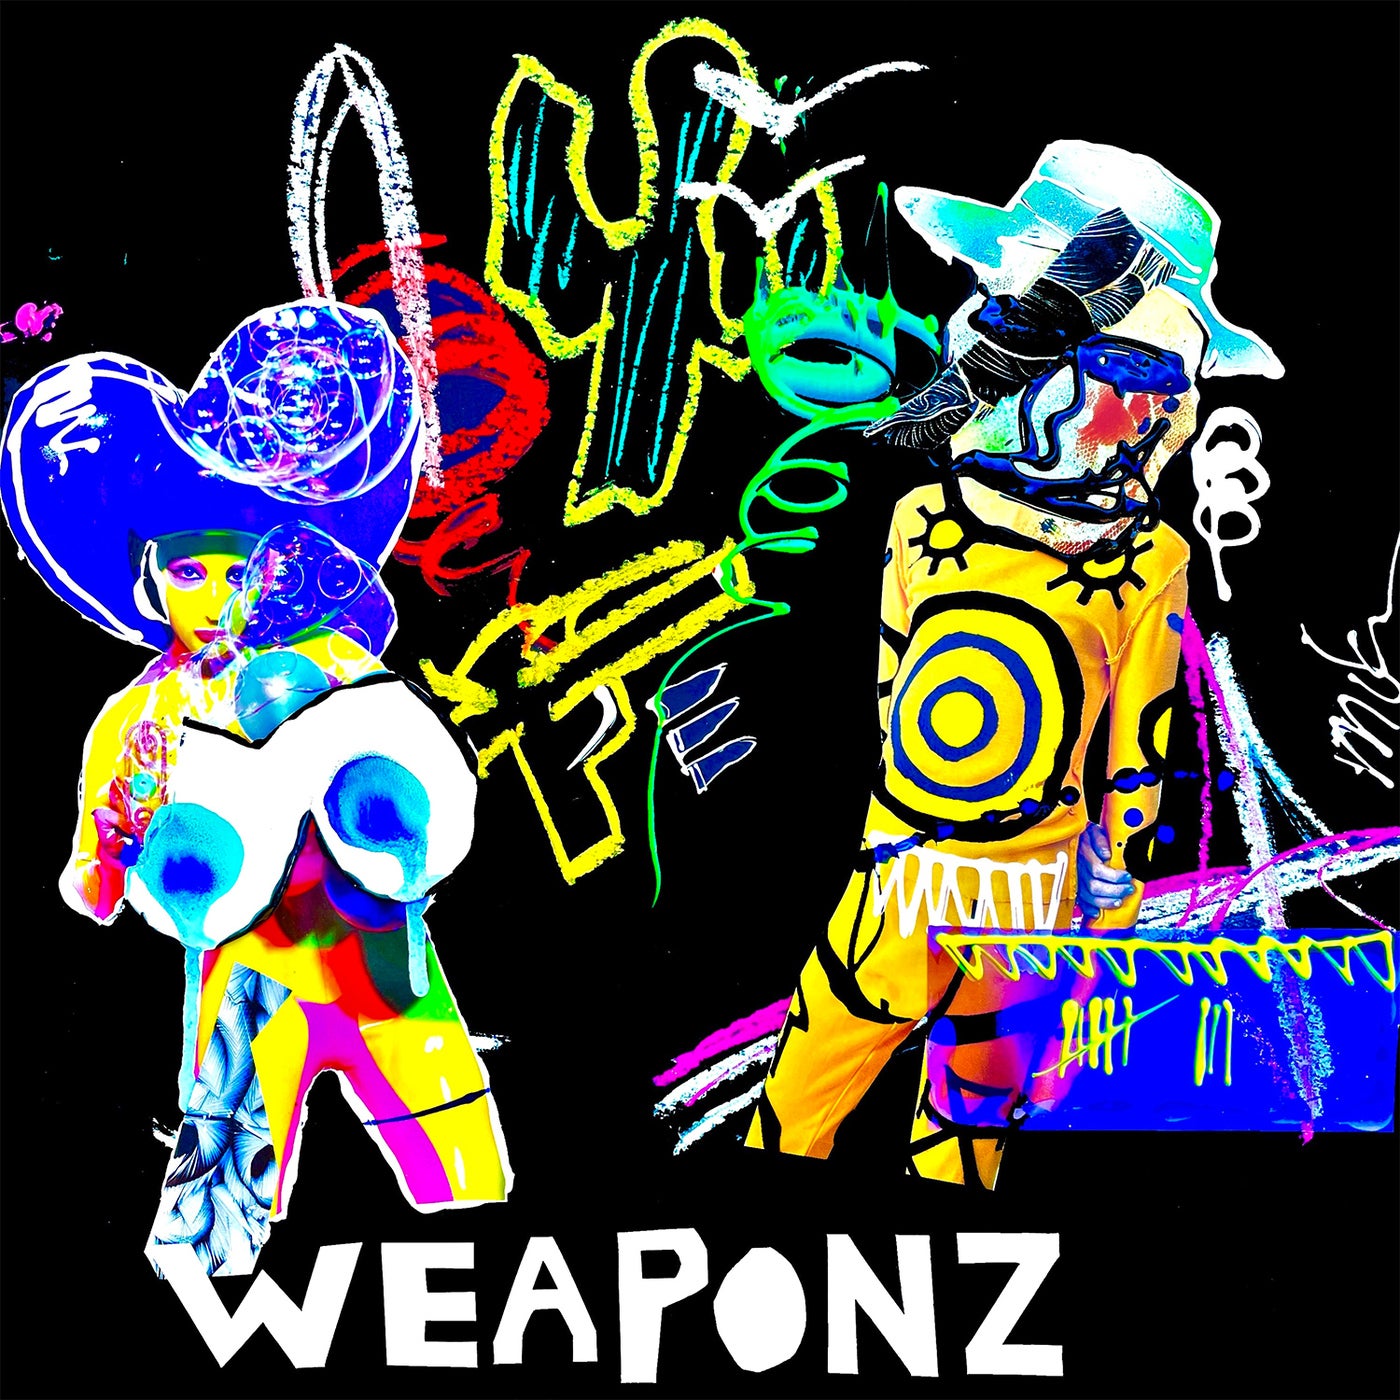 Weaponz (Extended Mix)